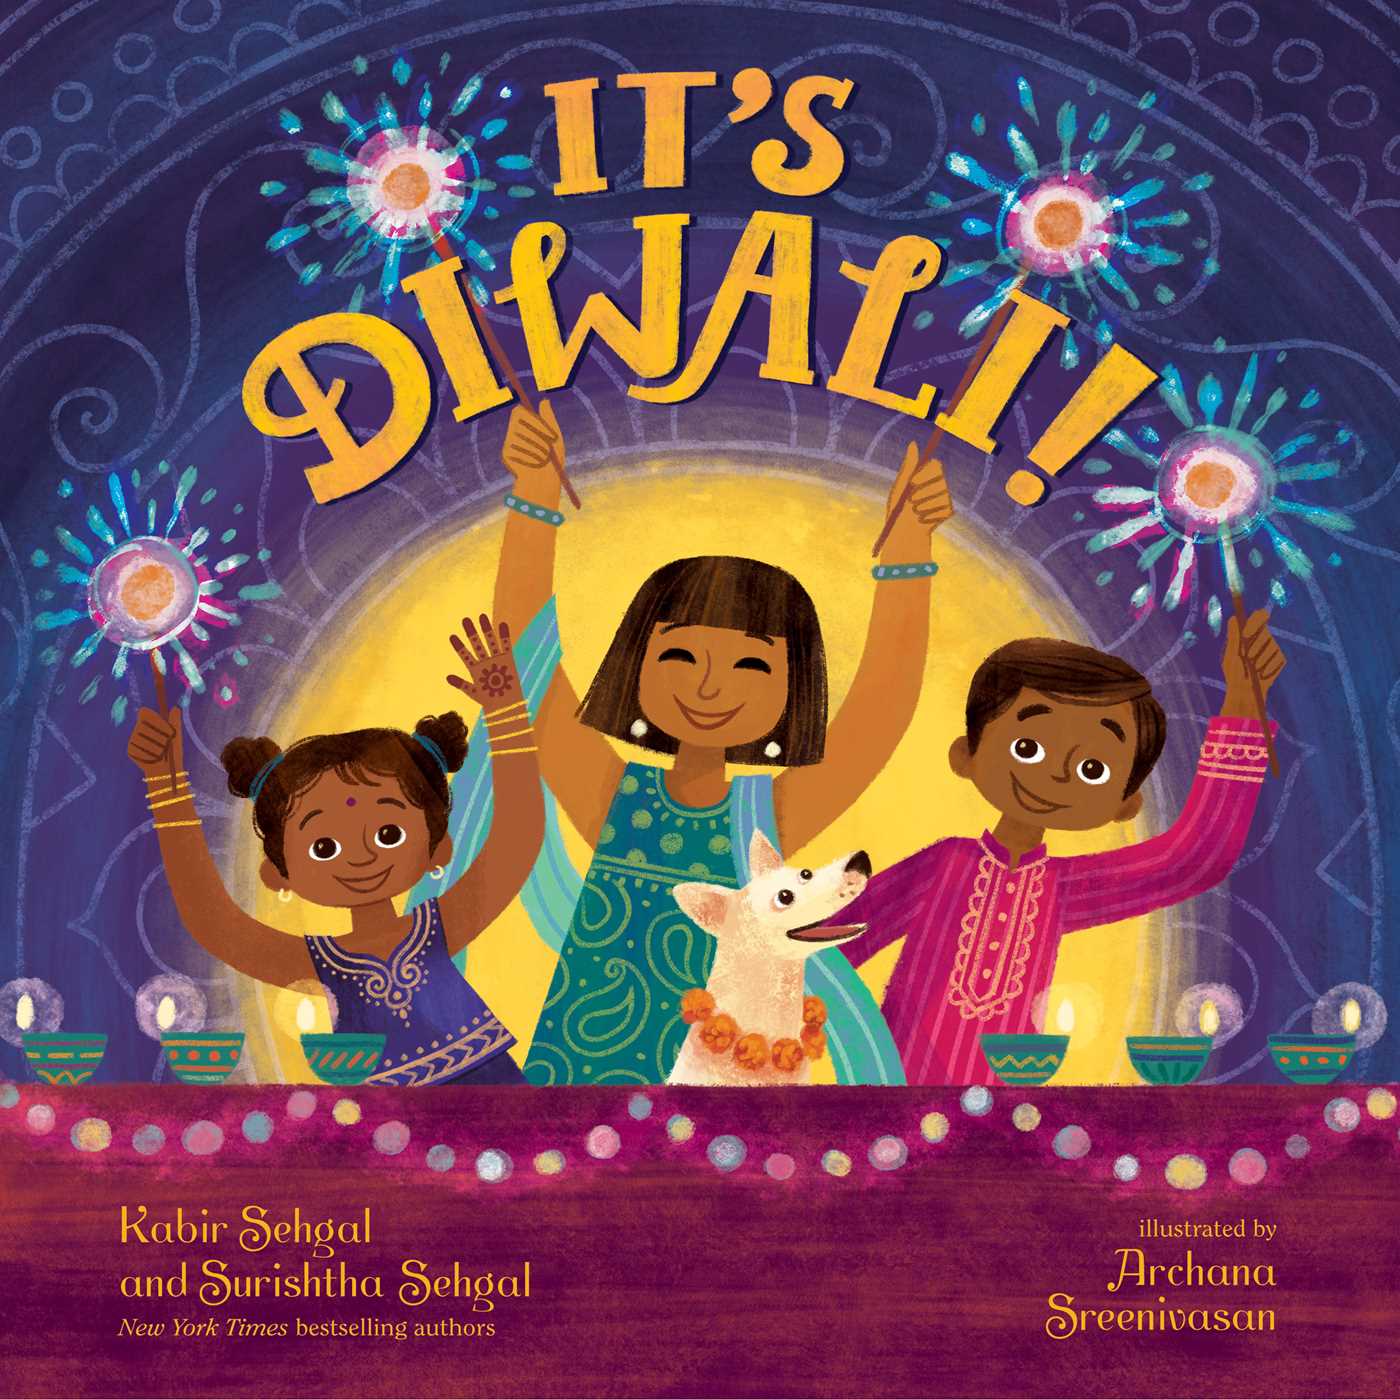 Image for "It's Diwali!"